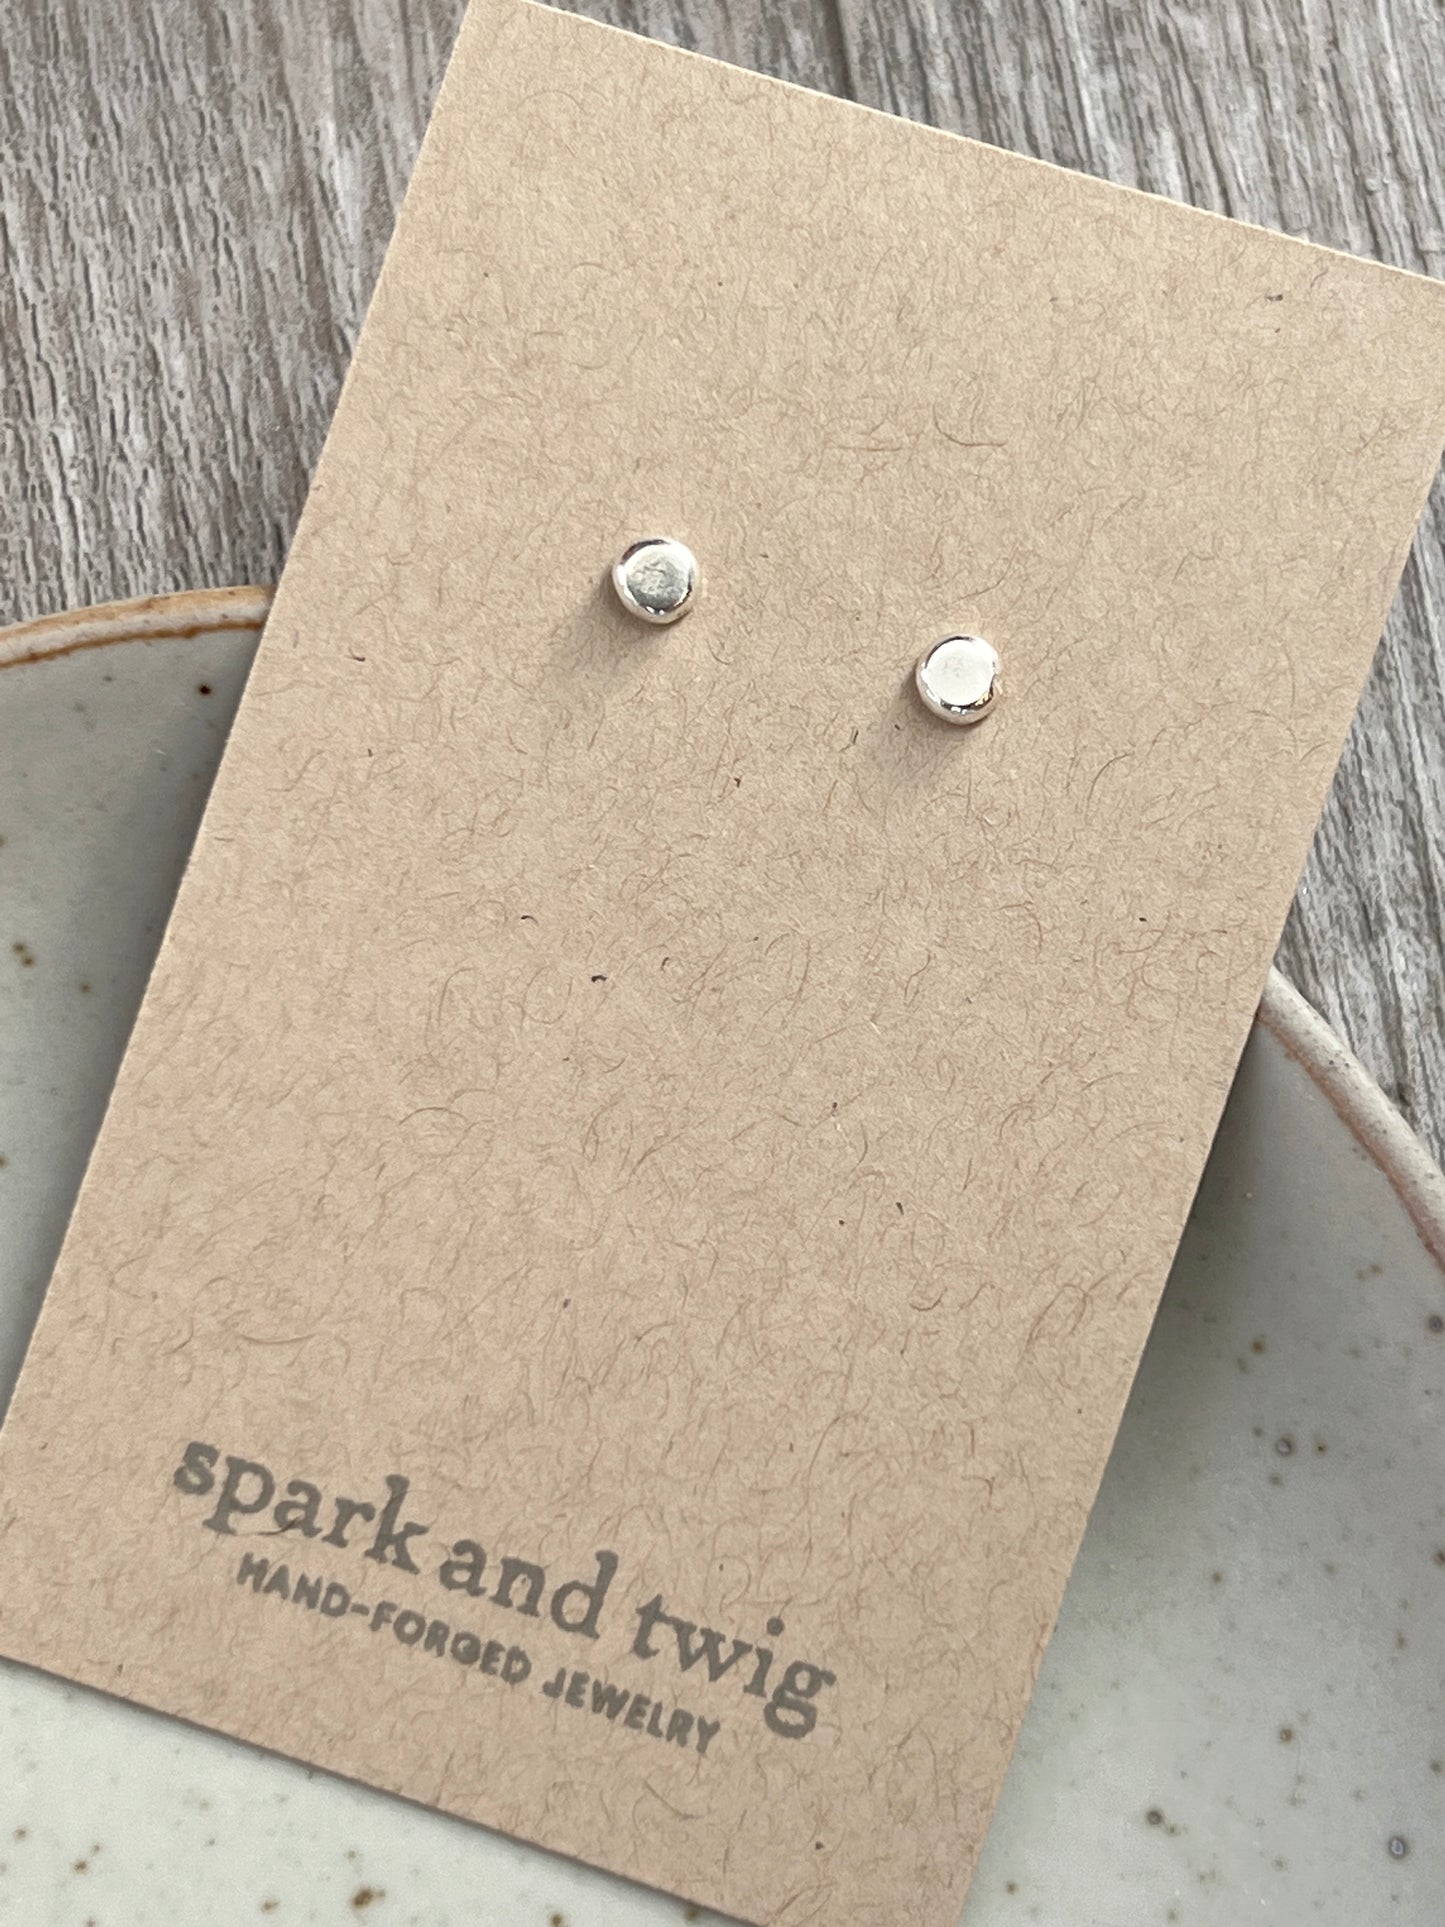 Spark and Twig Sterling Silver Dot Stud Earrings